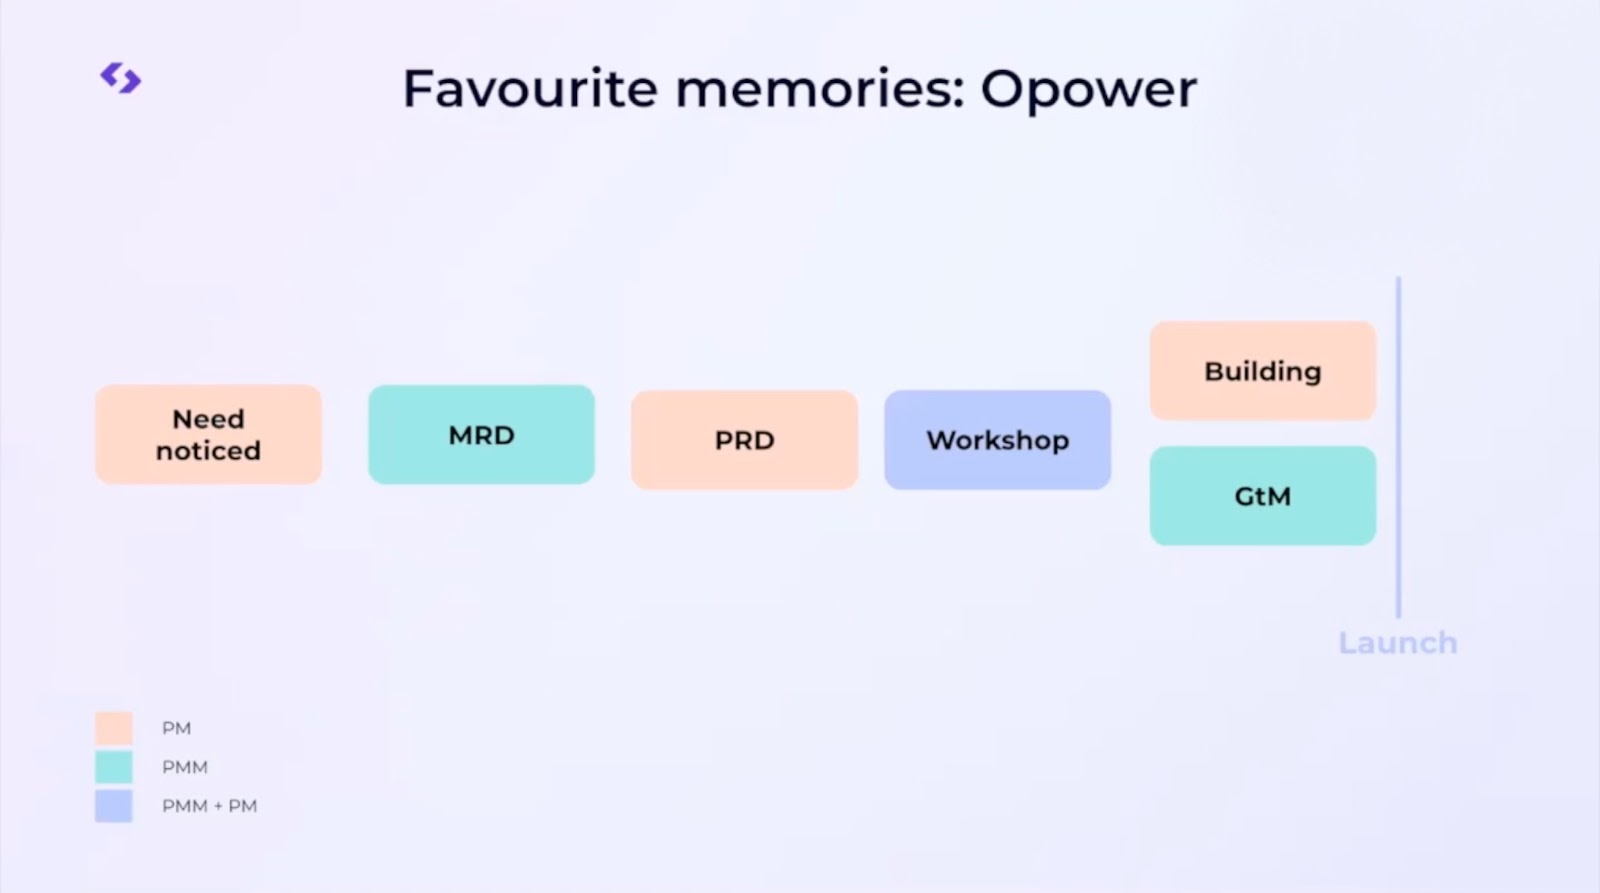 Title: Favourite memories: Opower. Diagram showing the collaboration process, as follows: Need noticed, MRD, PRD, then workshop, before the PM team works on building the solution while the PMM team tackles go-to-market.